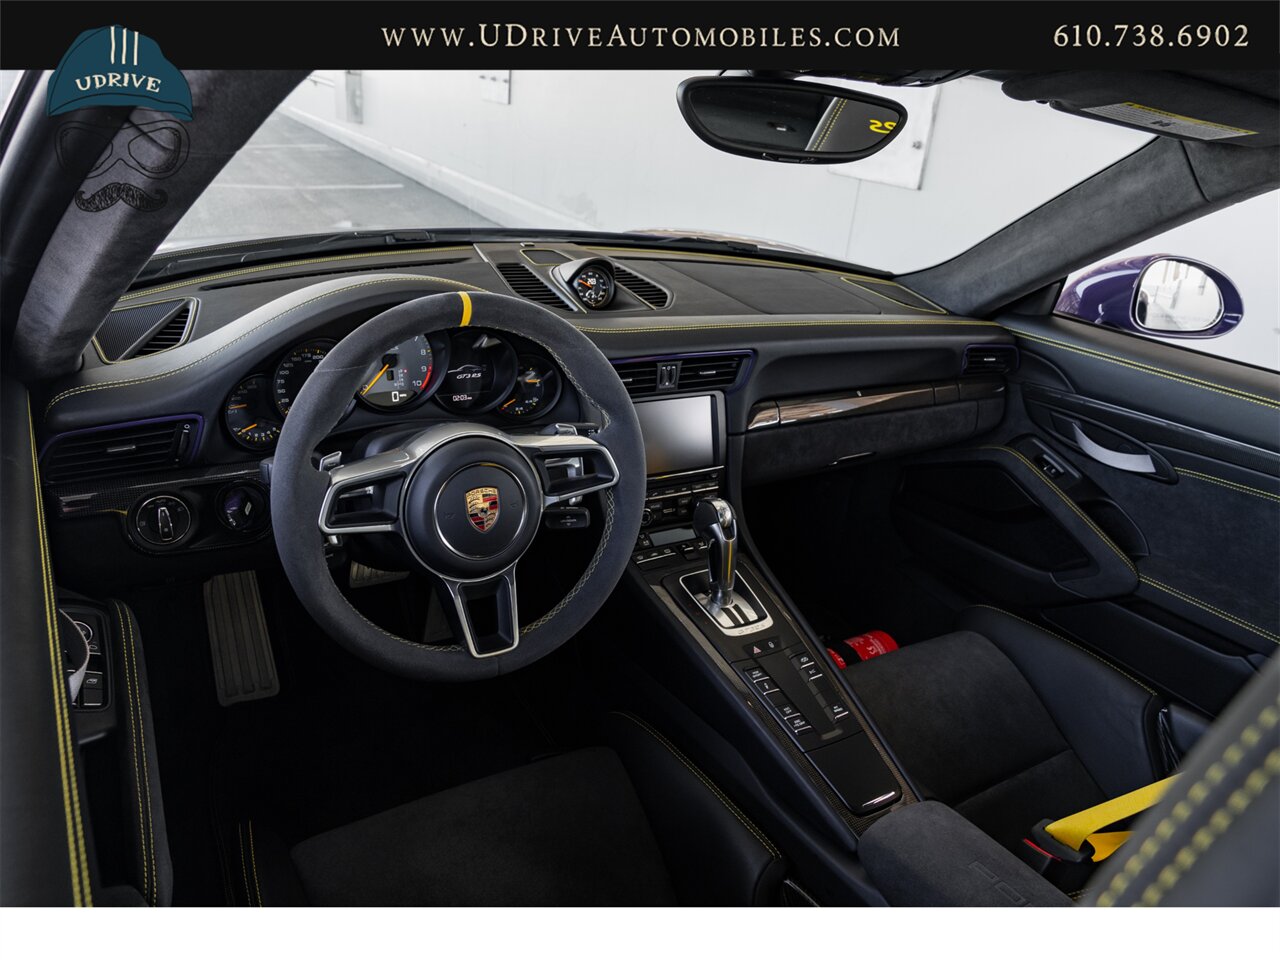 2016 Porsche 911 GT3 RS  1k Miles PCCB Front Axle Lift Yellow Stitching - Photo 6 - West Chester, PA 19382